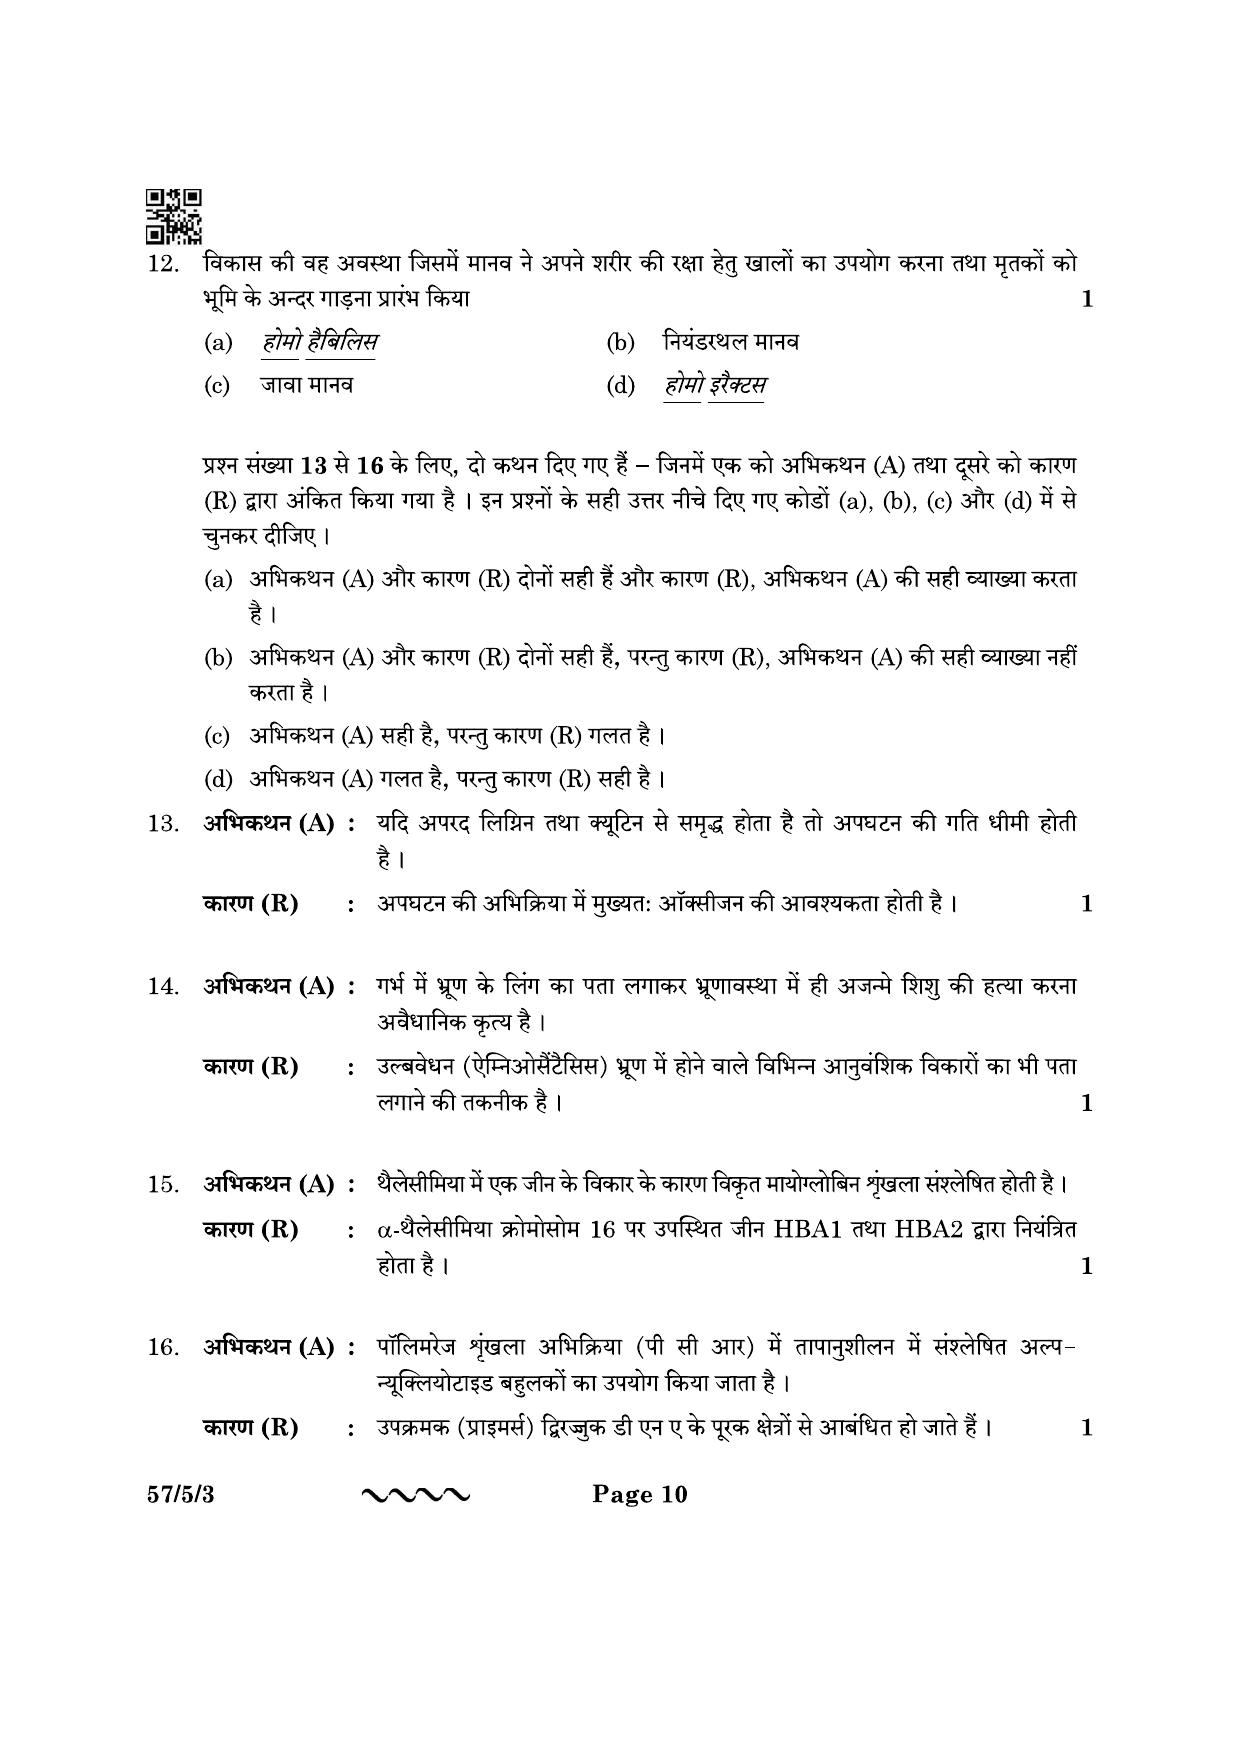 CBSE Class 12 57-5-3 Biology 2023 Question Paper - Page 10